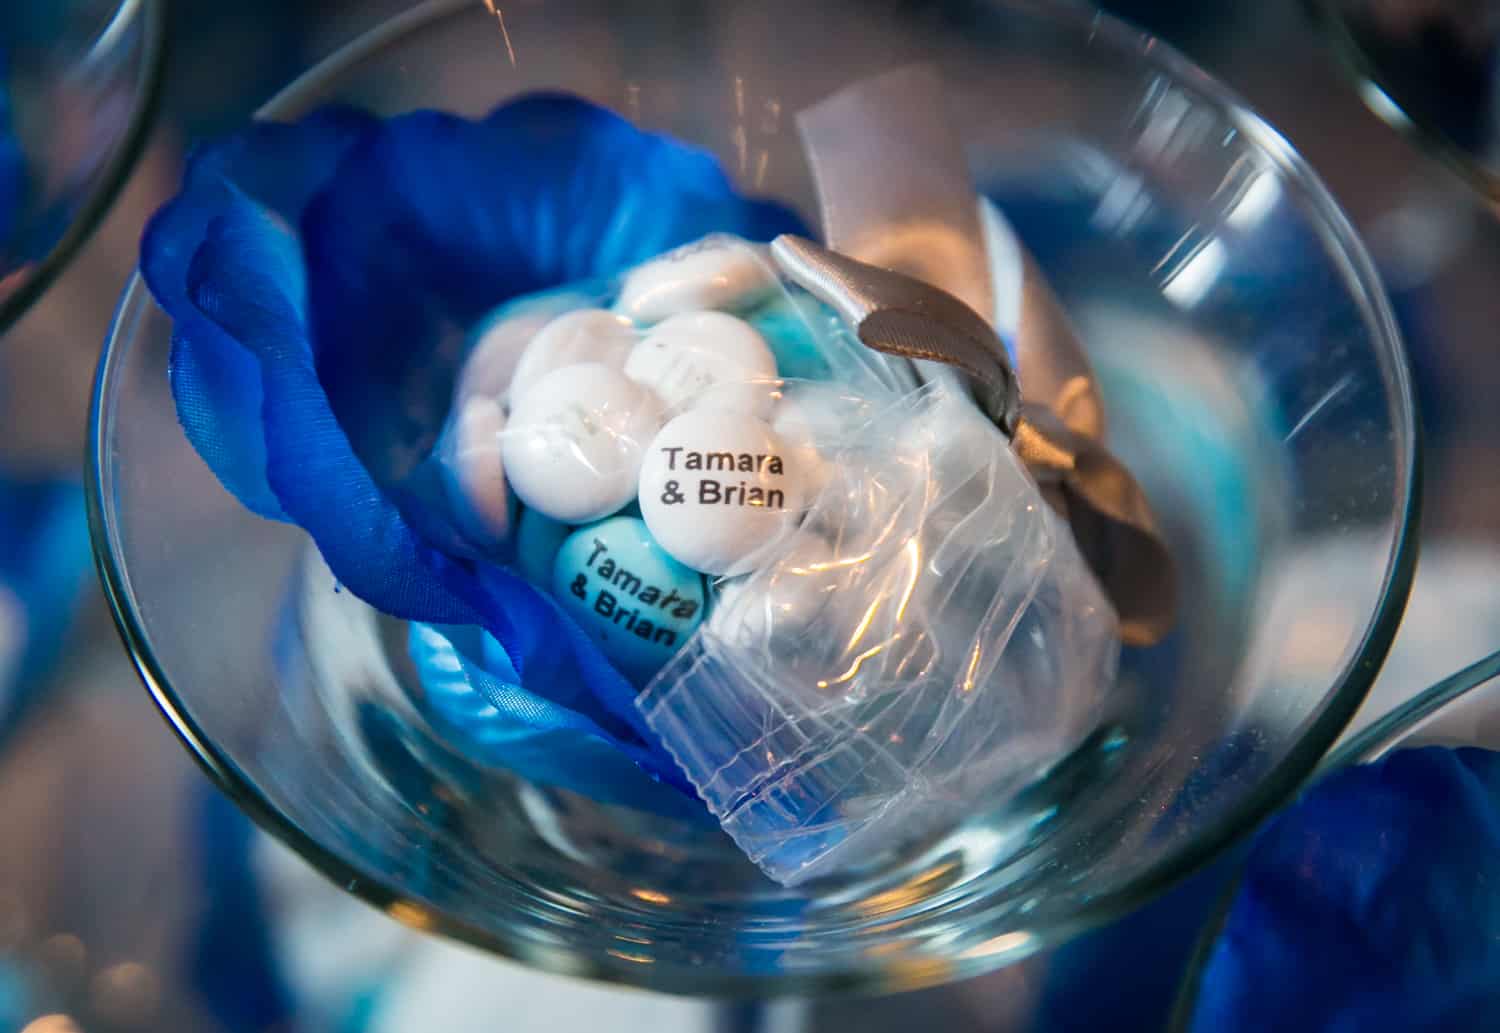 Martini glass holding blue and white M&Ms personalized with 'Tamara and Brian'